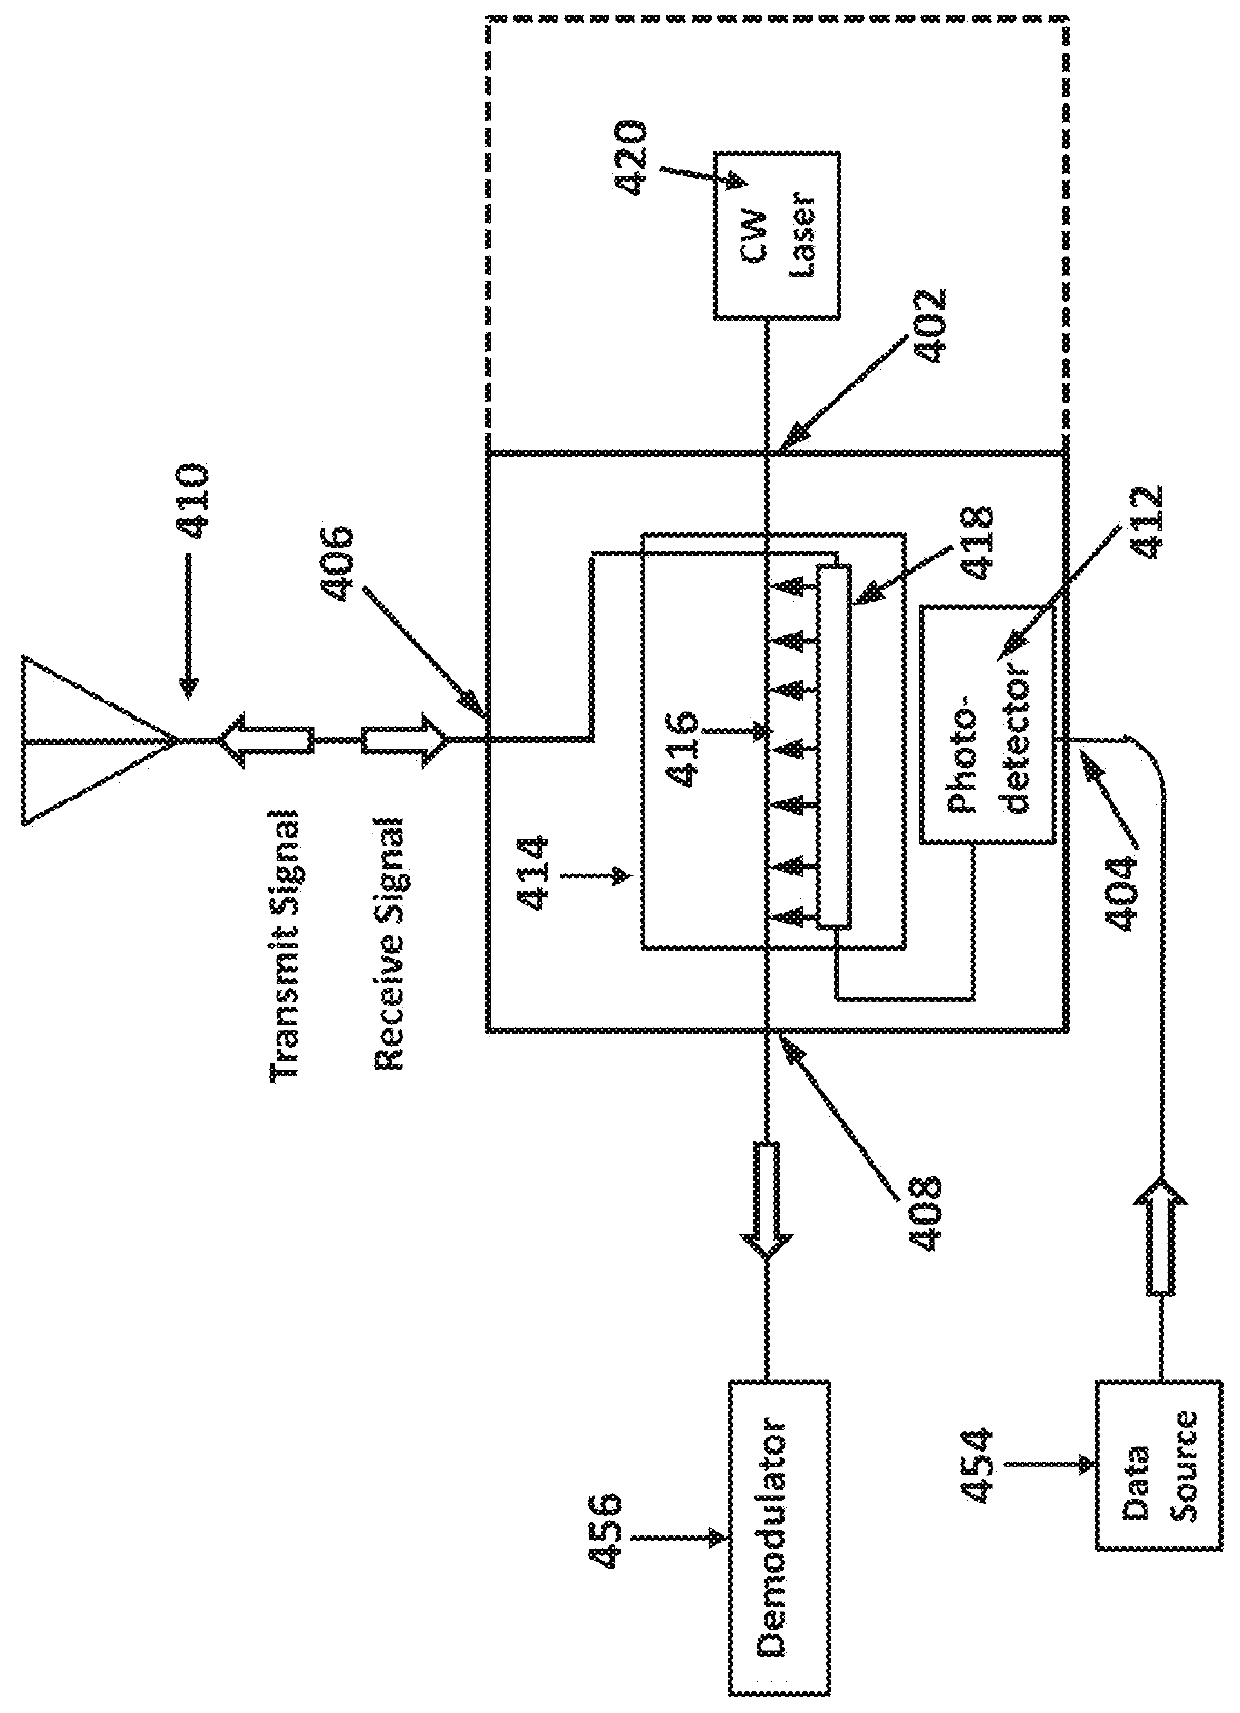 Tunable photonic RF circulator for simultaneous transmit and receive